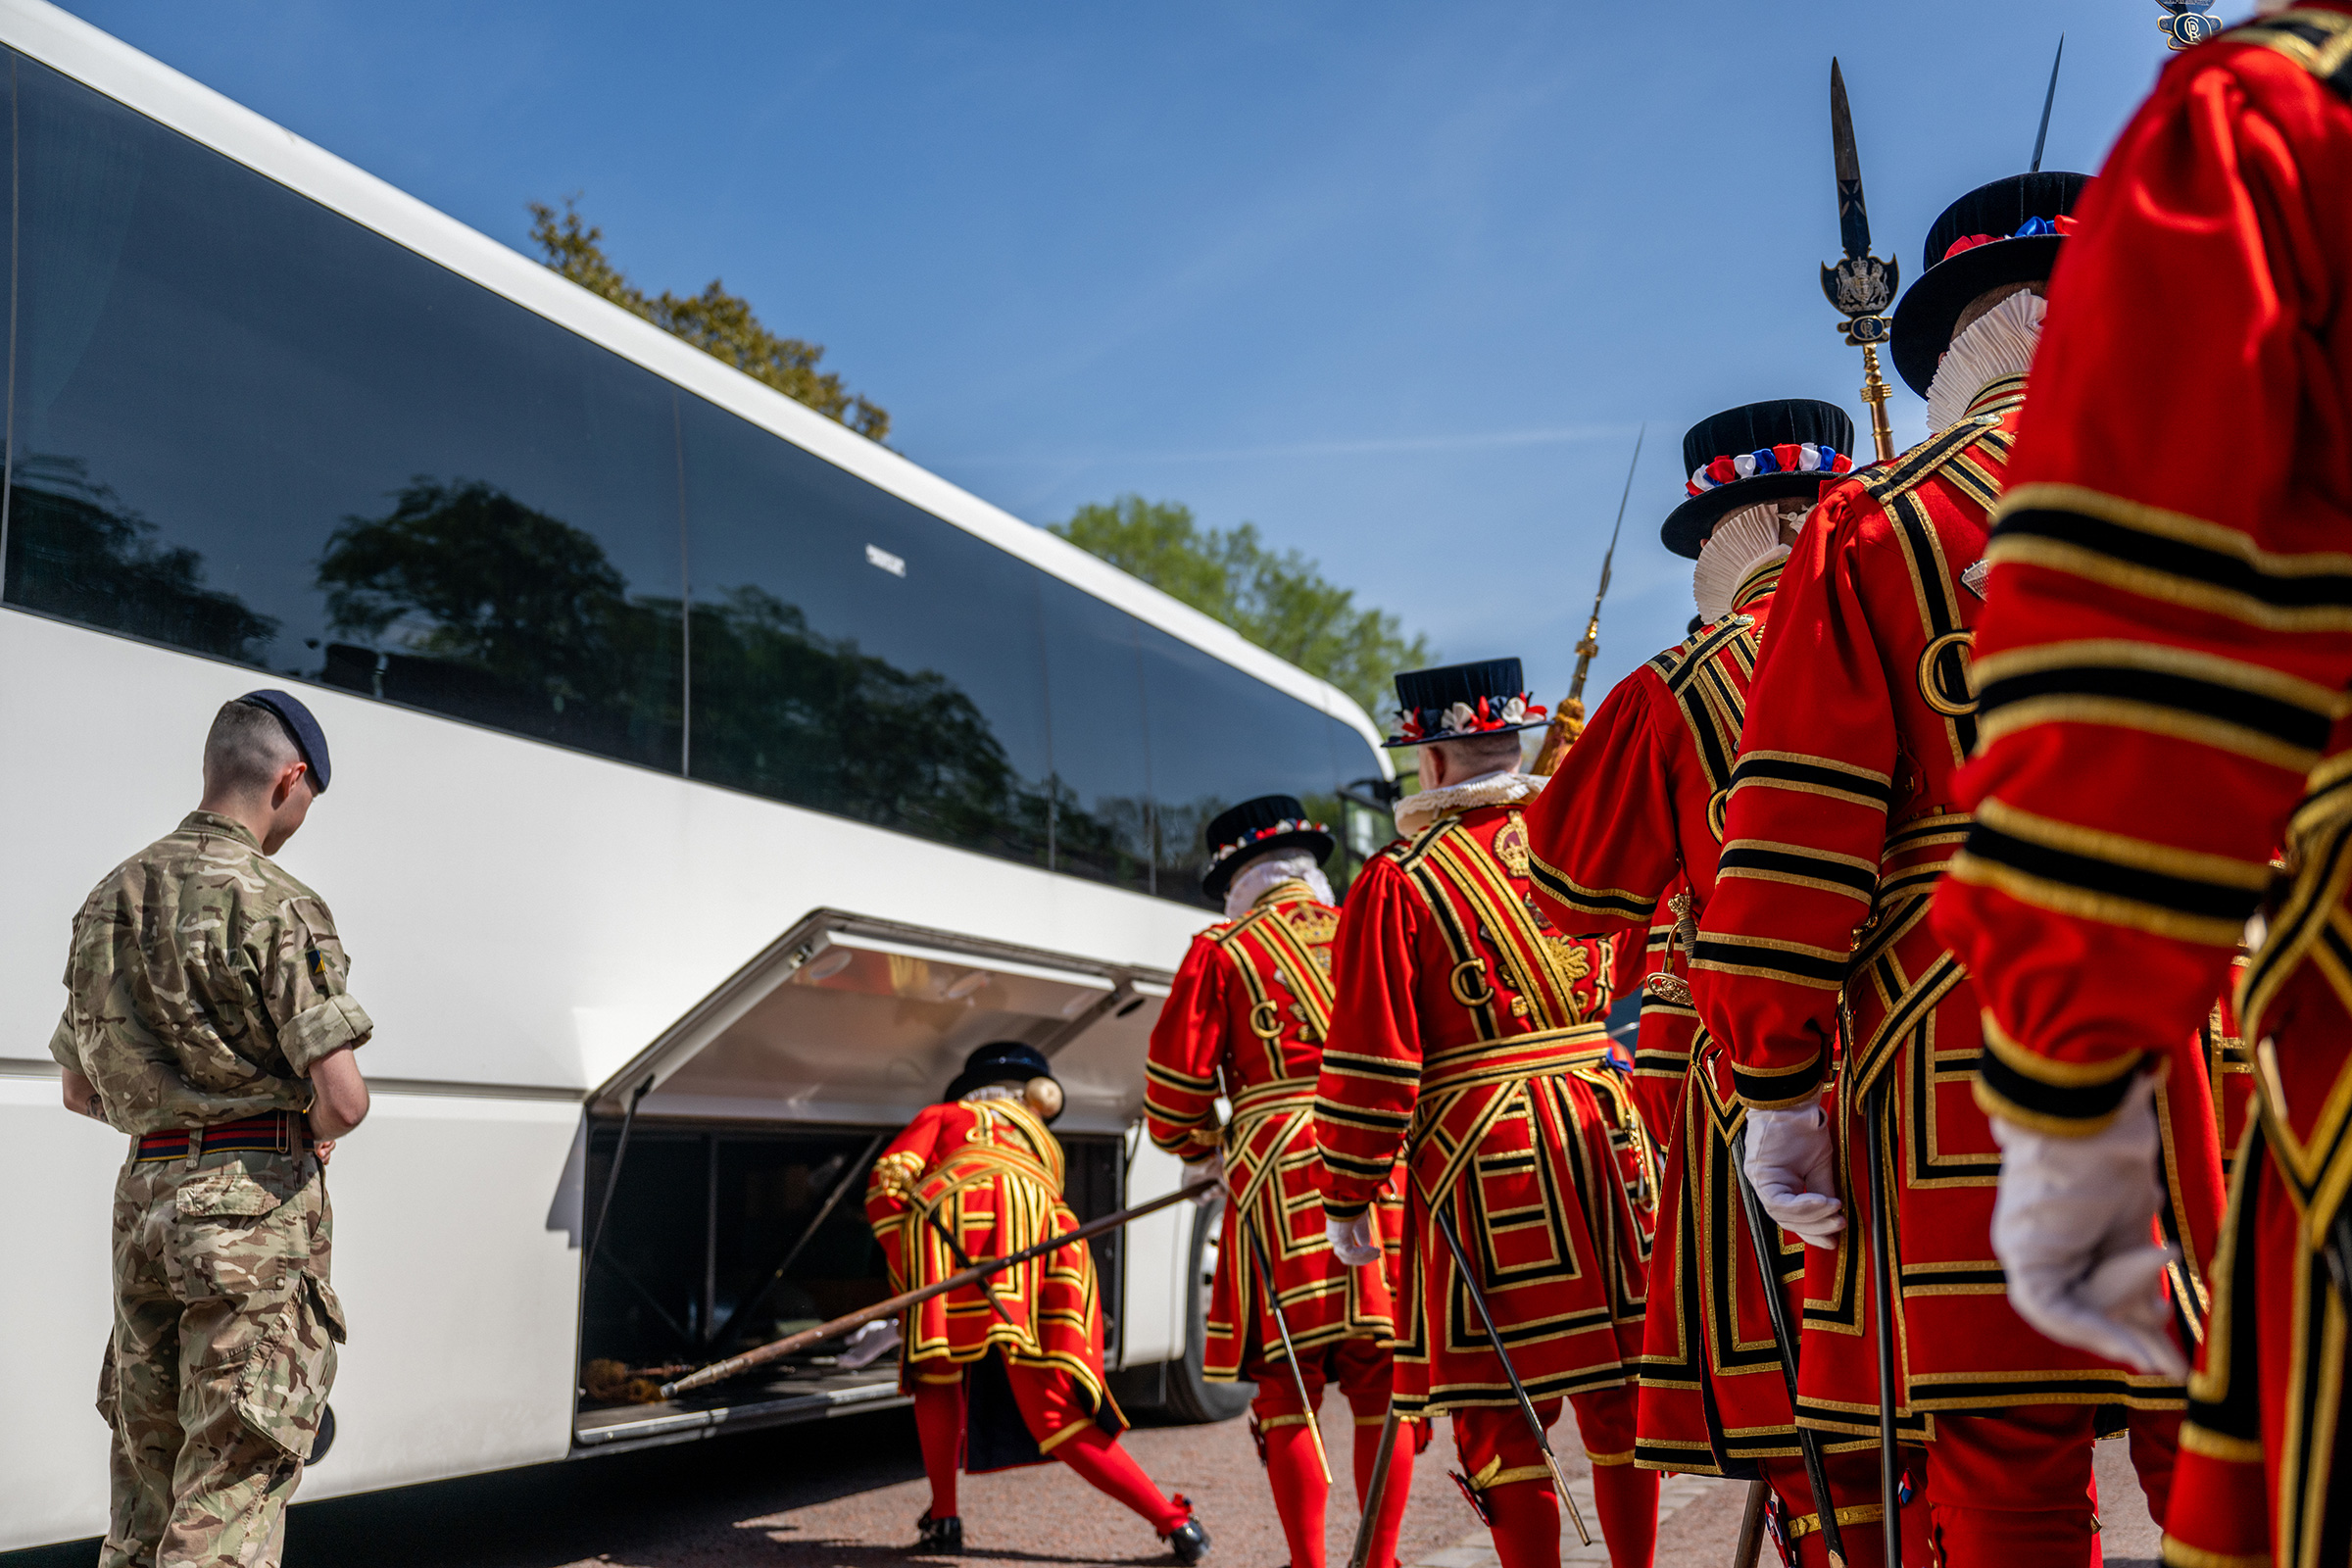 Yeoman of the Guard prepare to board a coach bus on May 3.